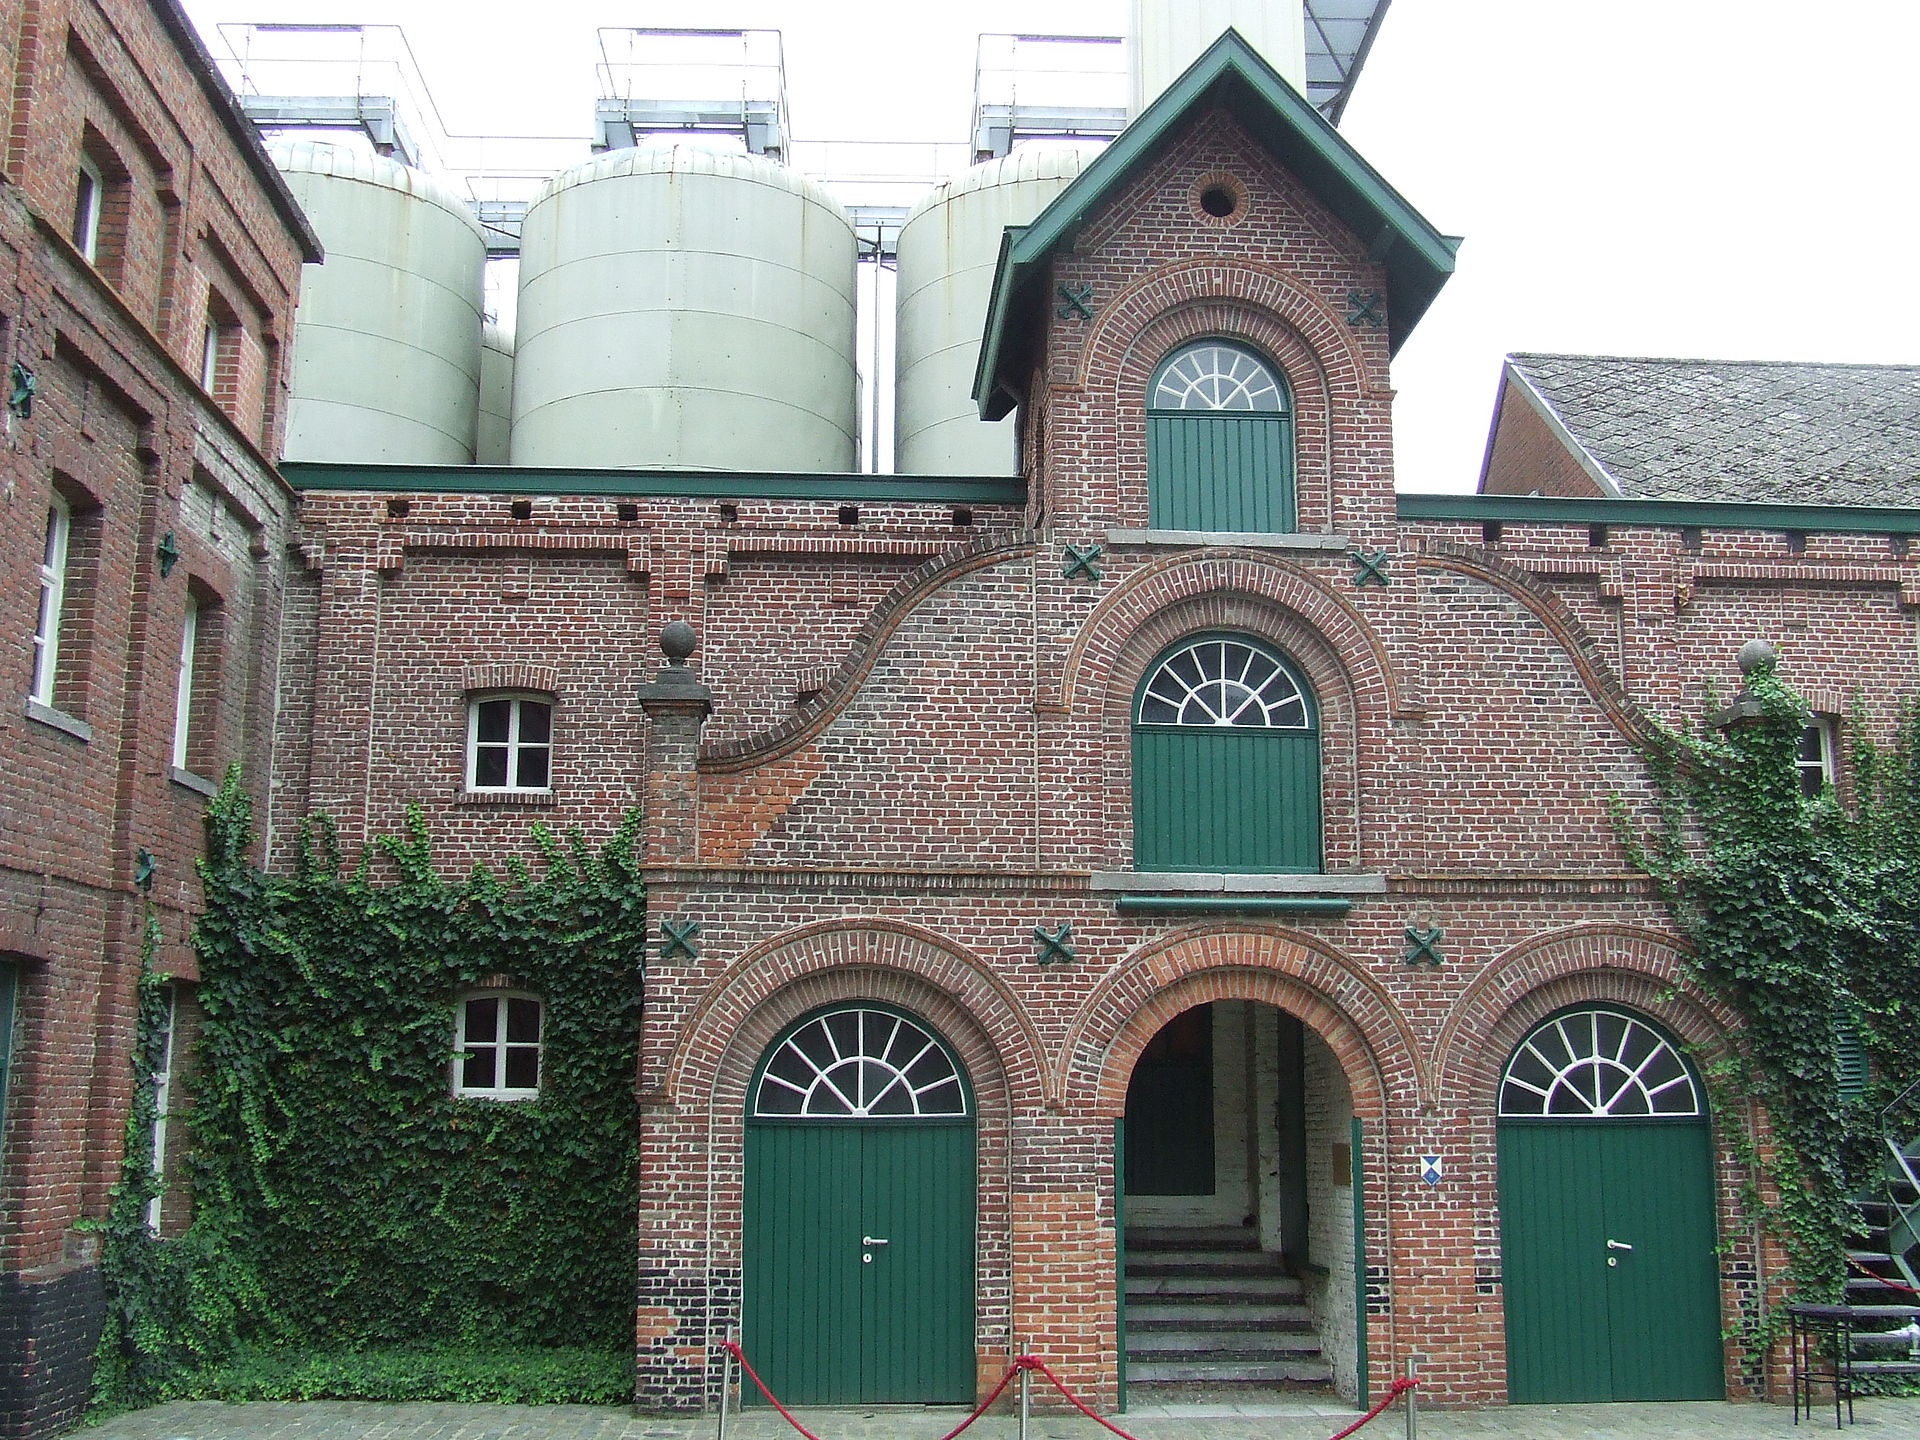 Belgian architecture and beer: Why ugly beats boring